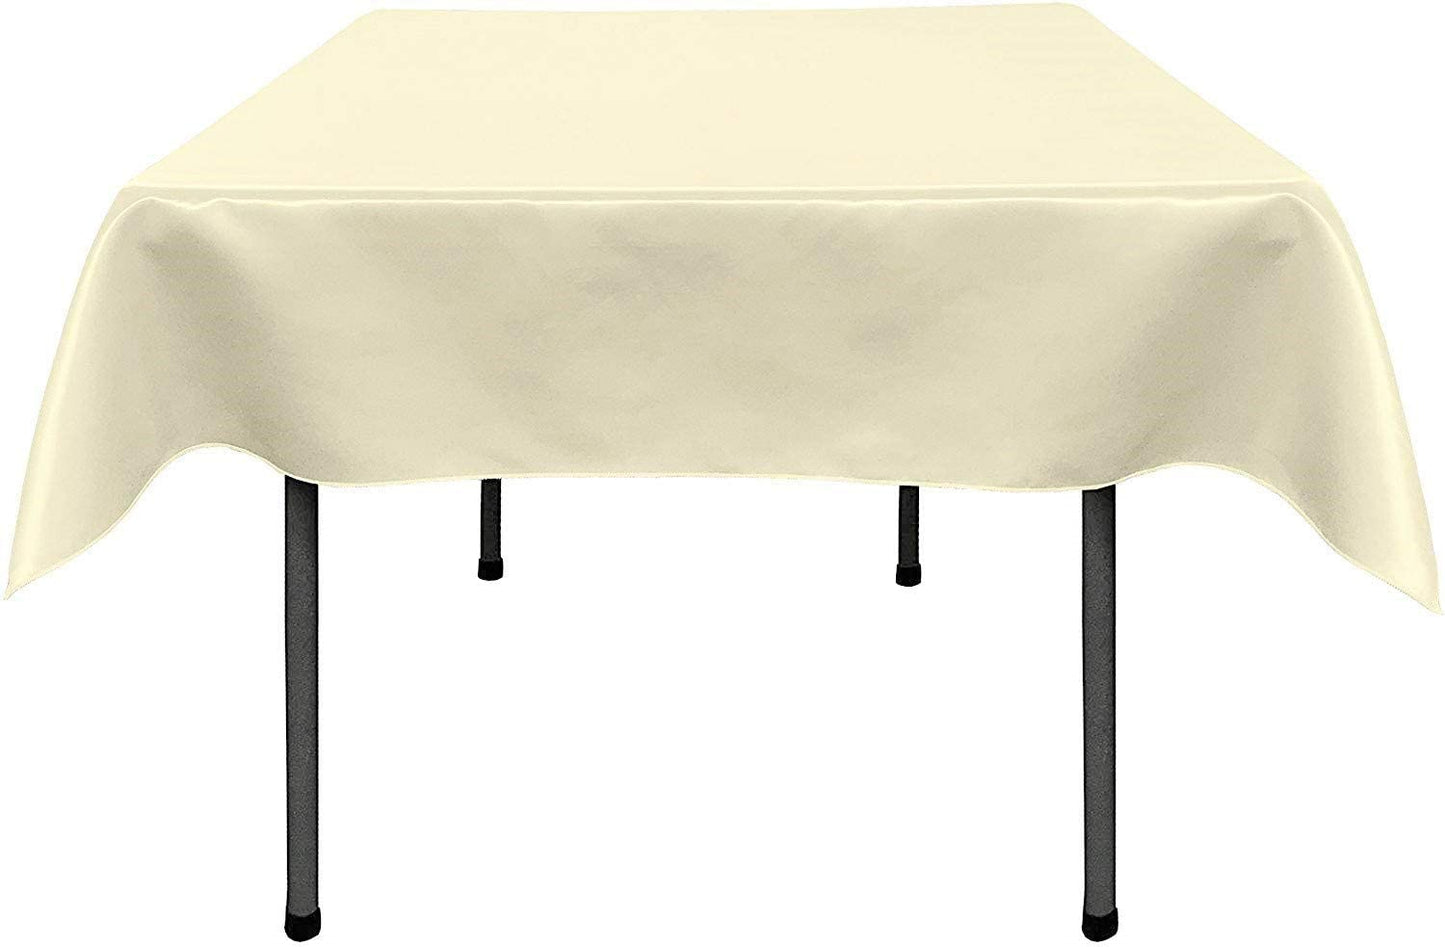 Polyester Bridal Satin Table Tablecloth (Ivory,